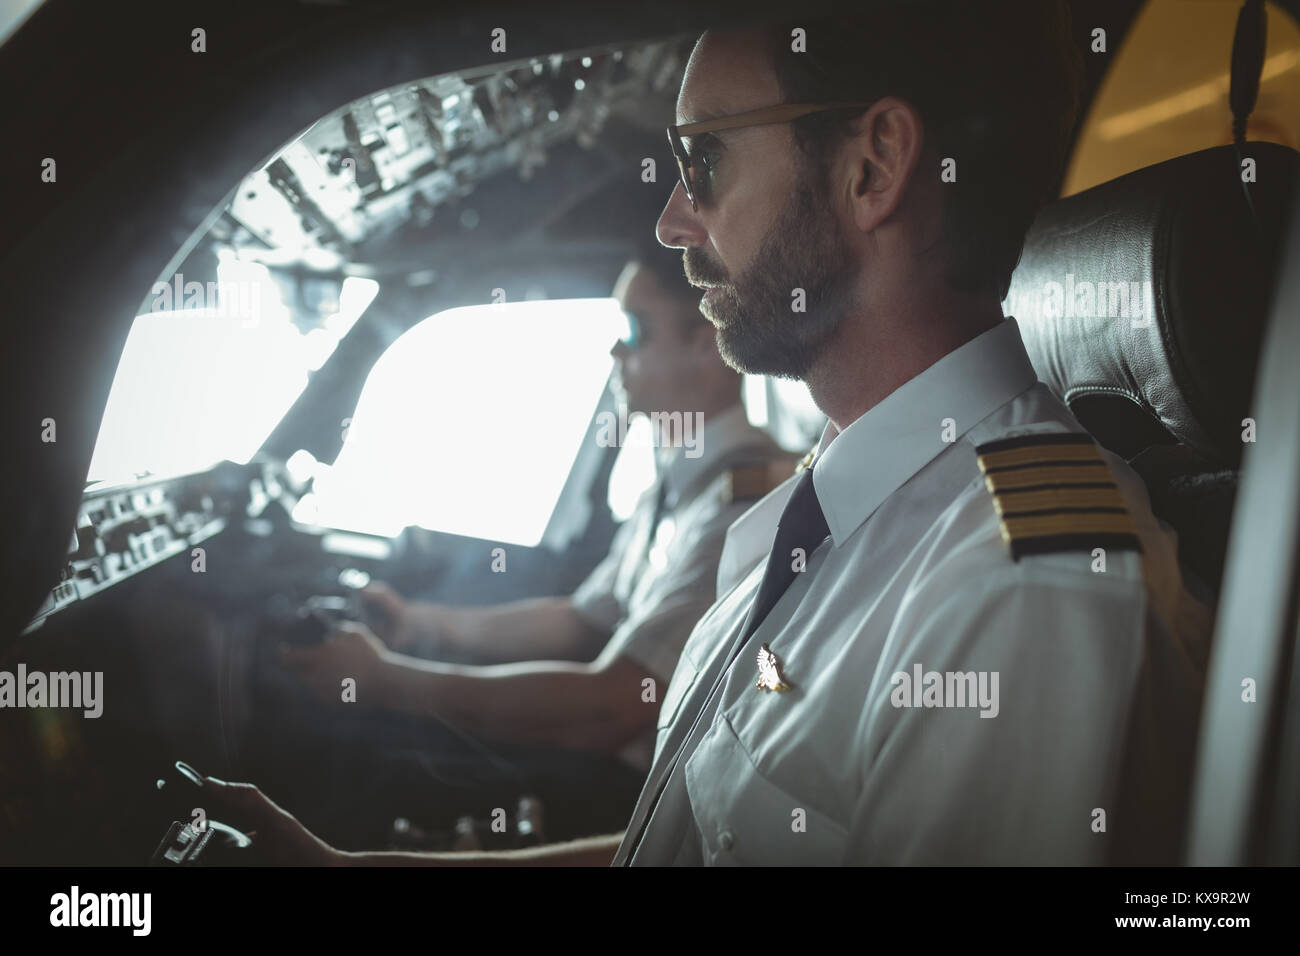 Pilot and copilot flying an airplane Stock Photo